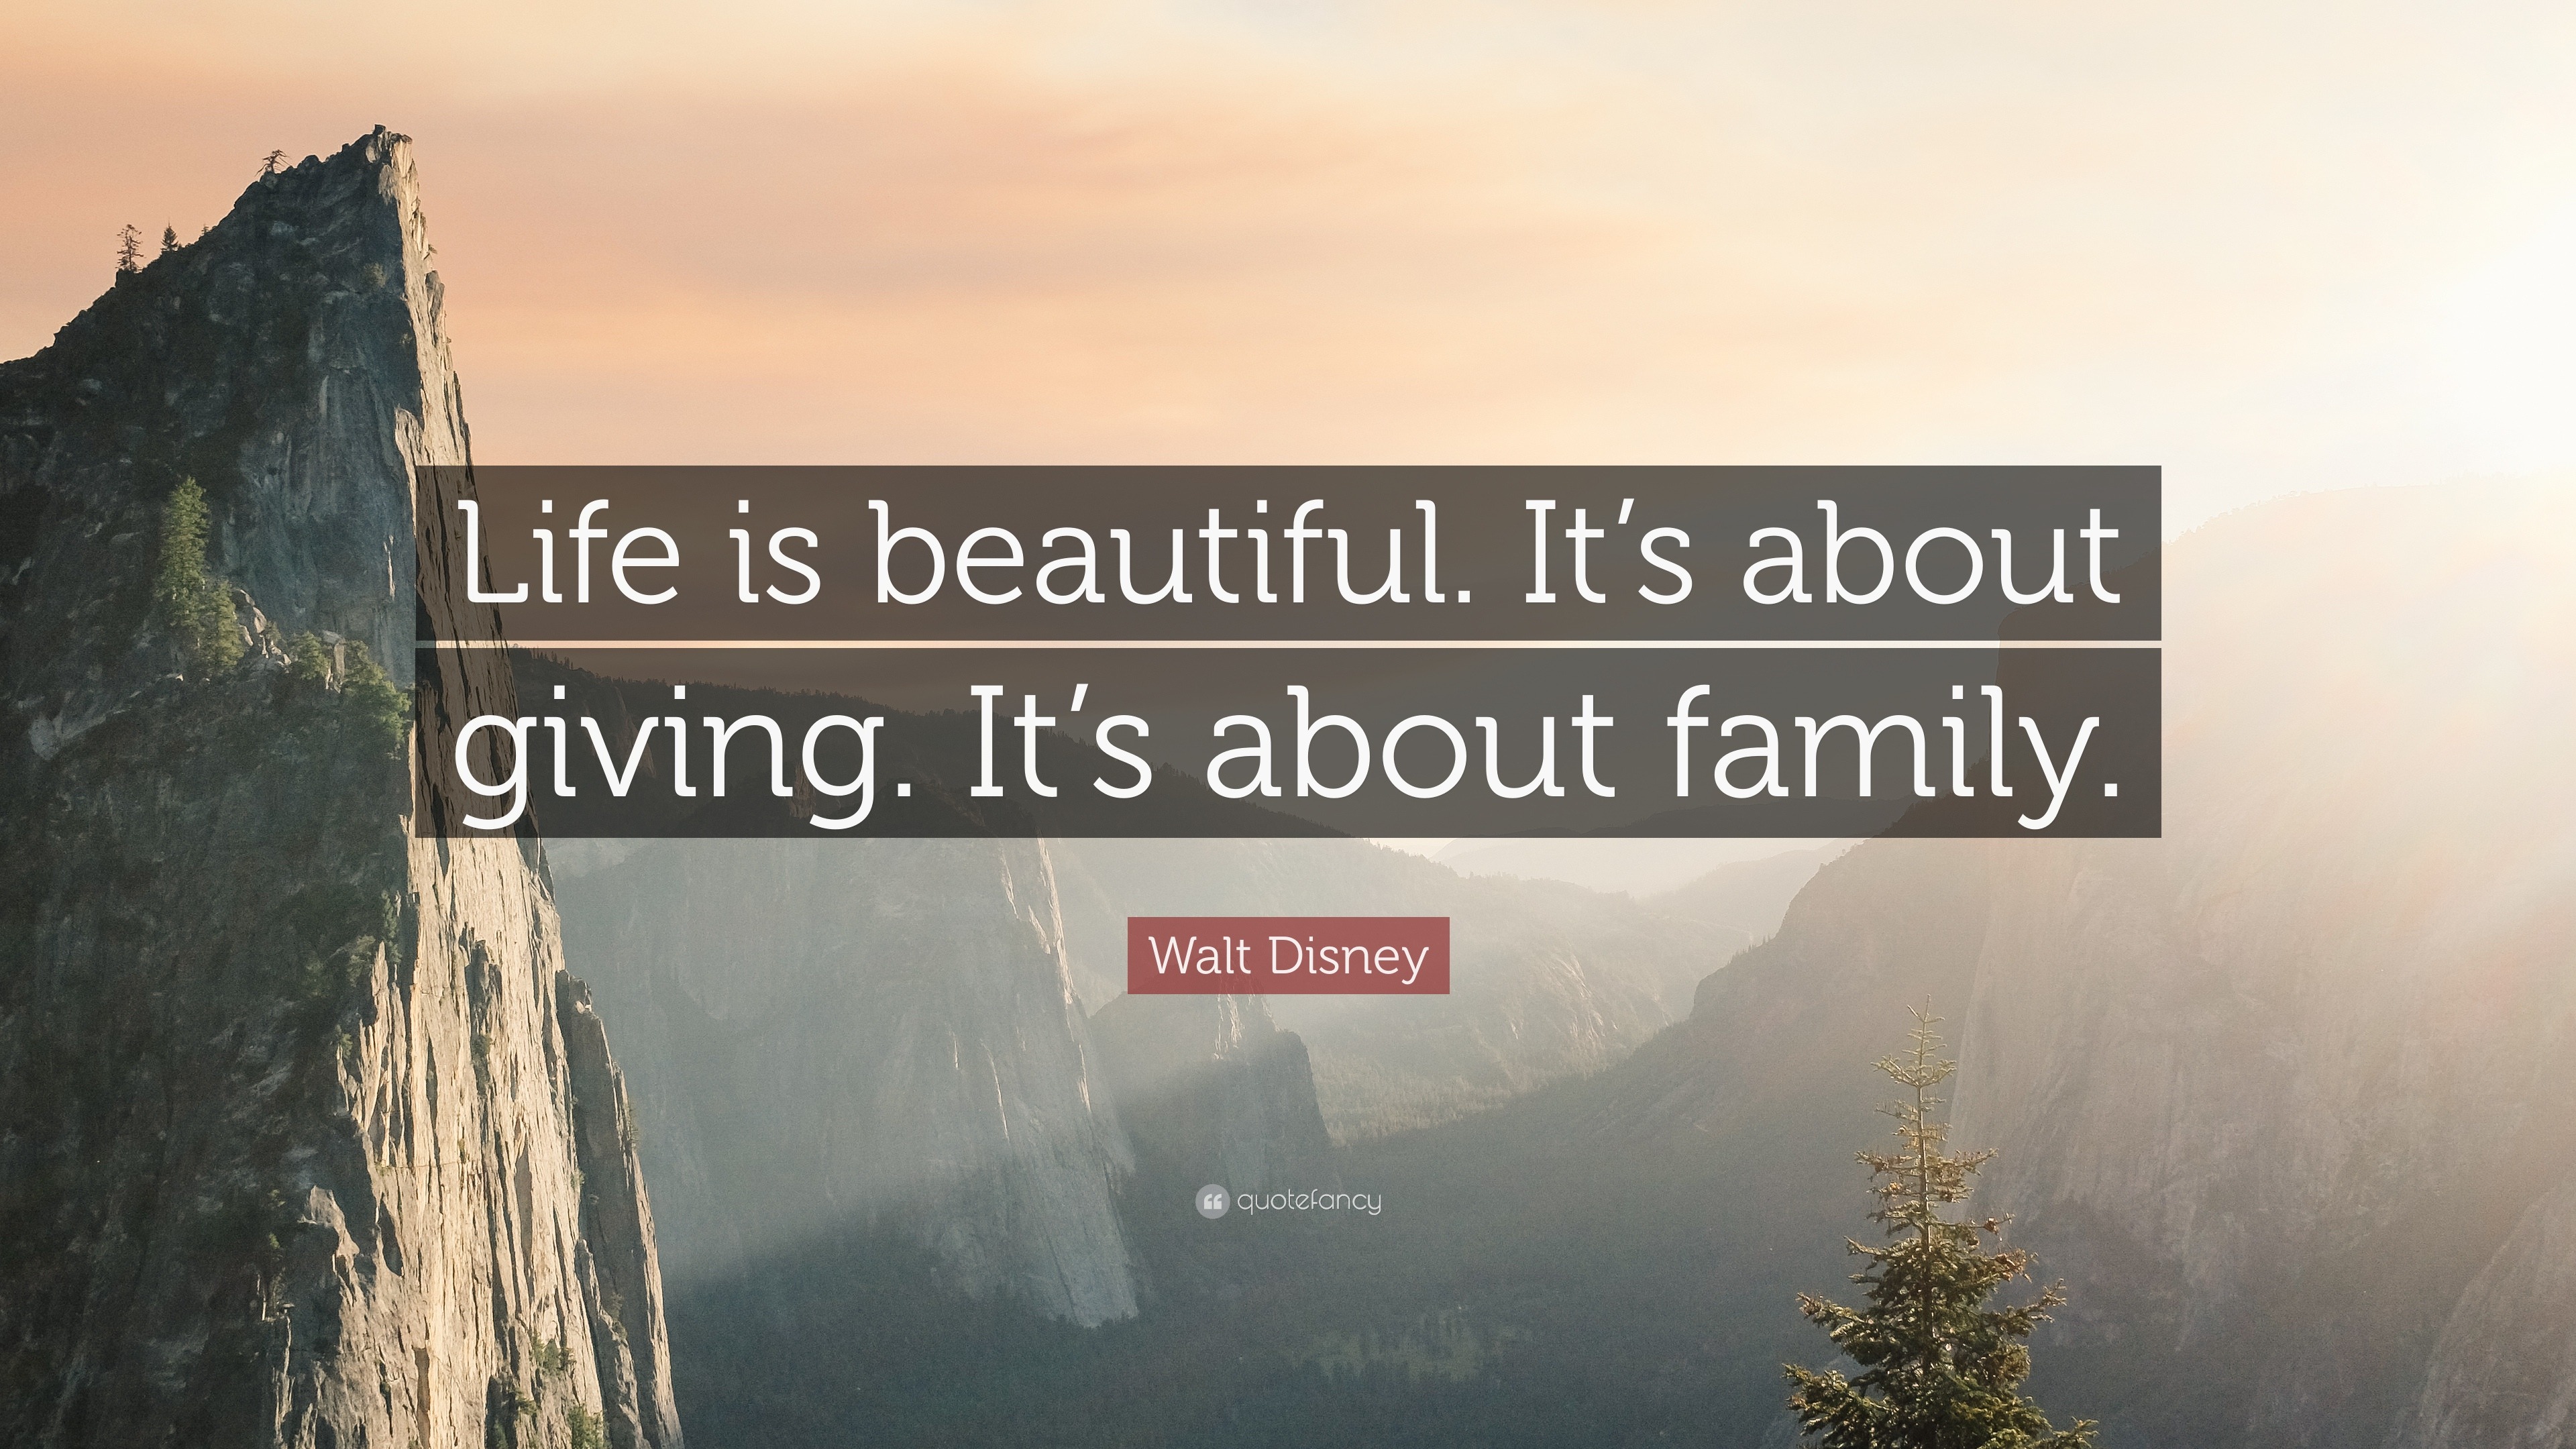 Walt Disney Quote: “Life is beautiful. It’s about giving. It’s about